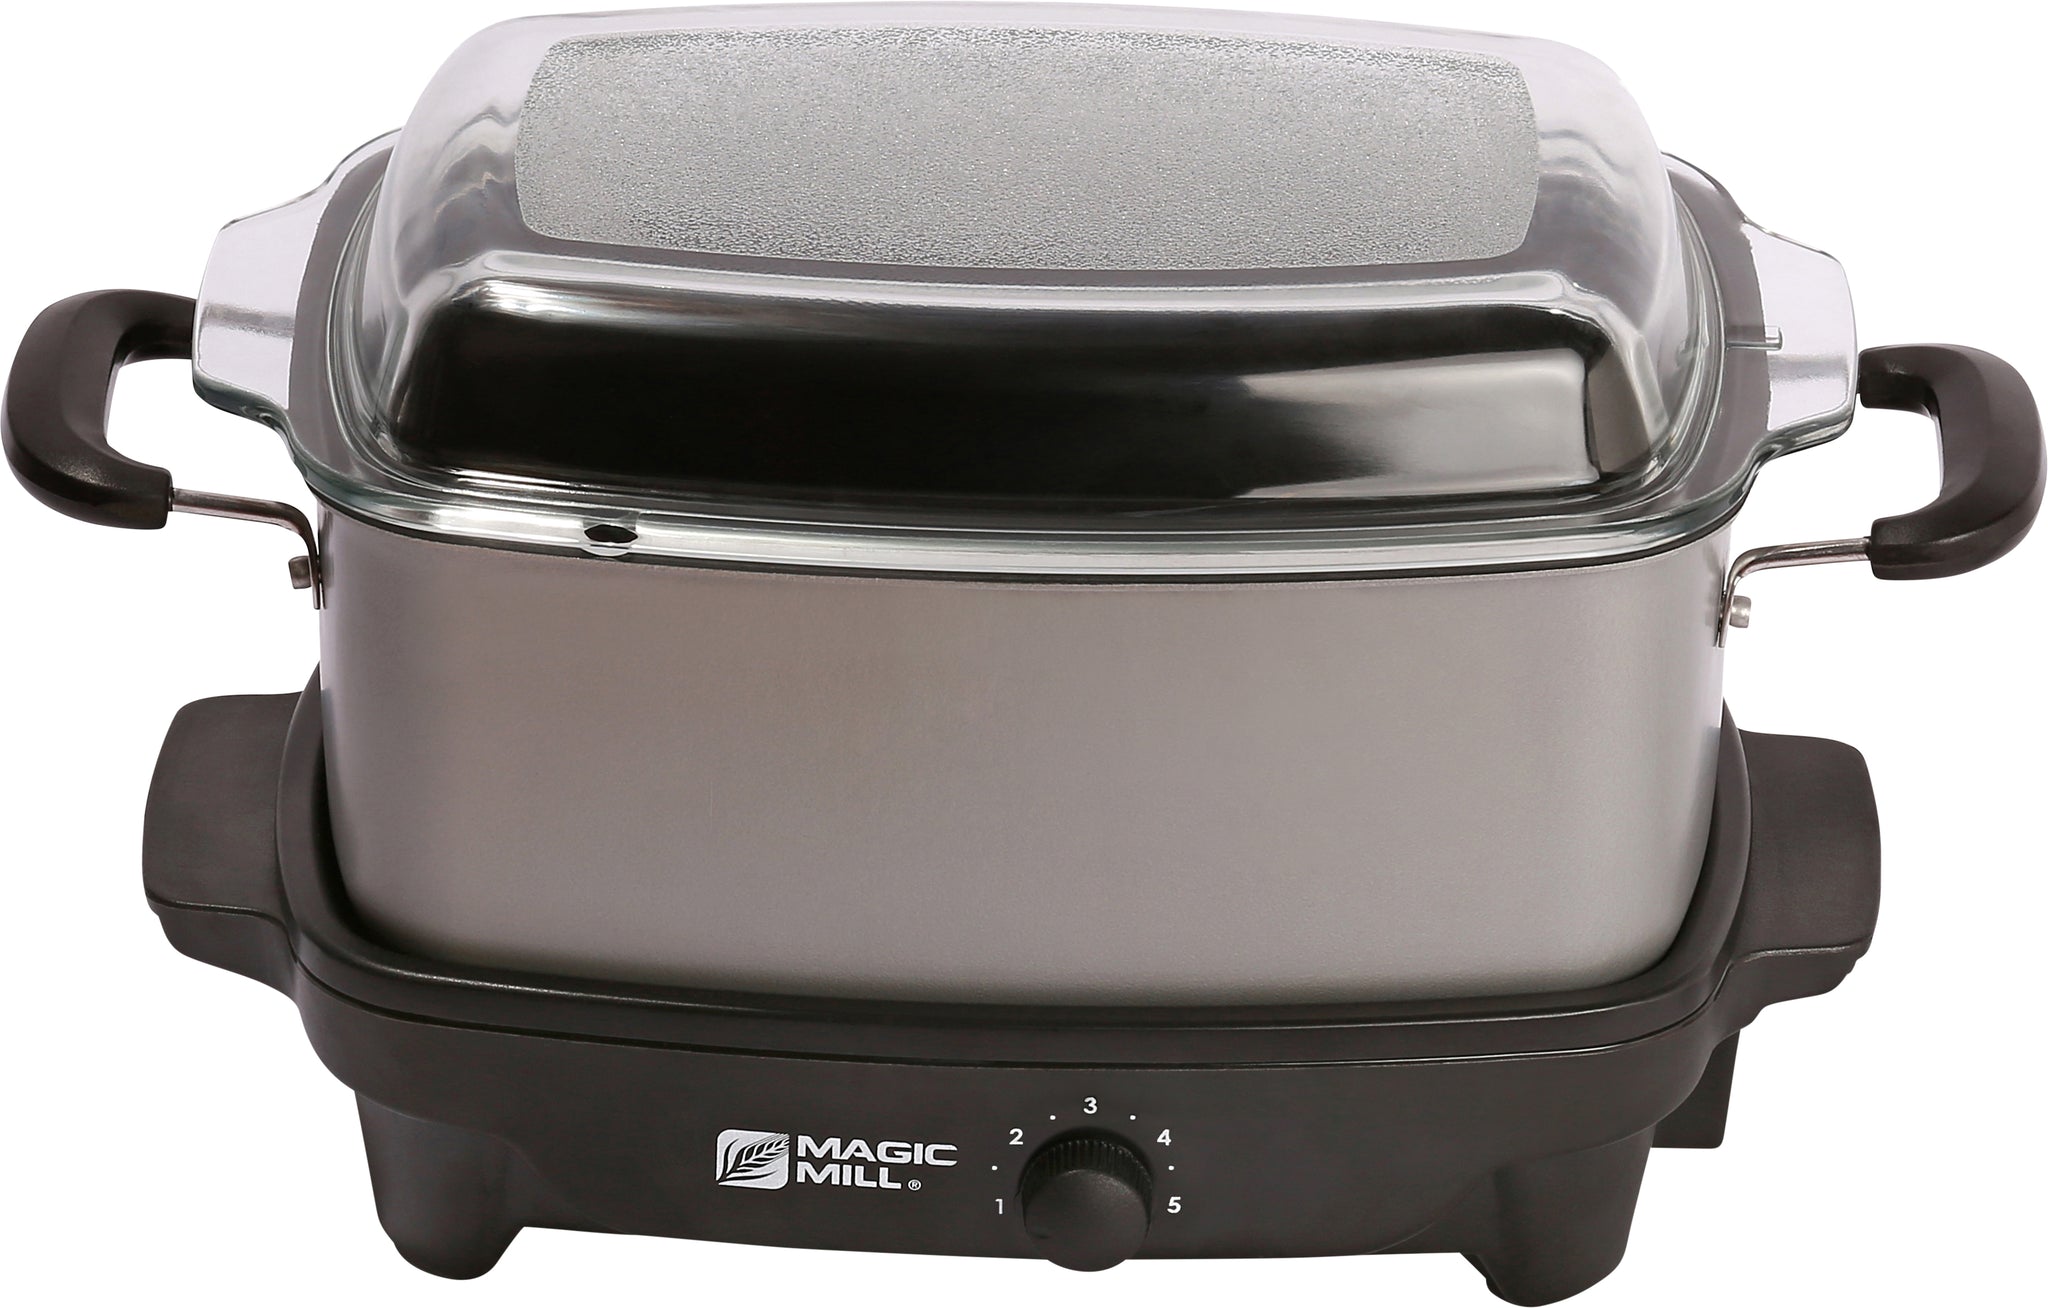 Magic mill slow cooker / crock pot-Available in 2 sizes –